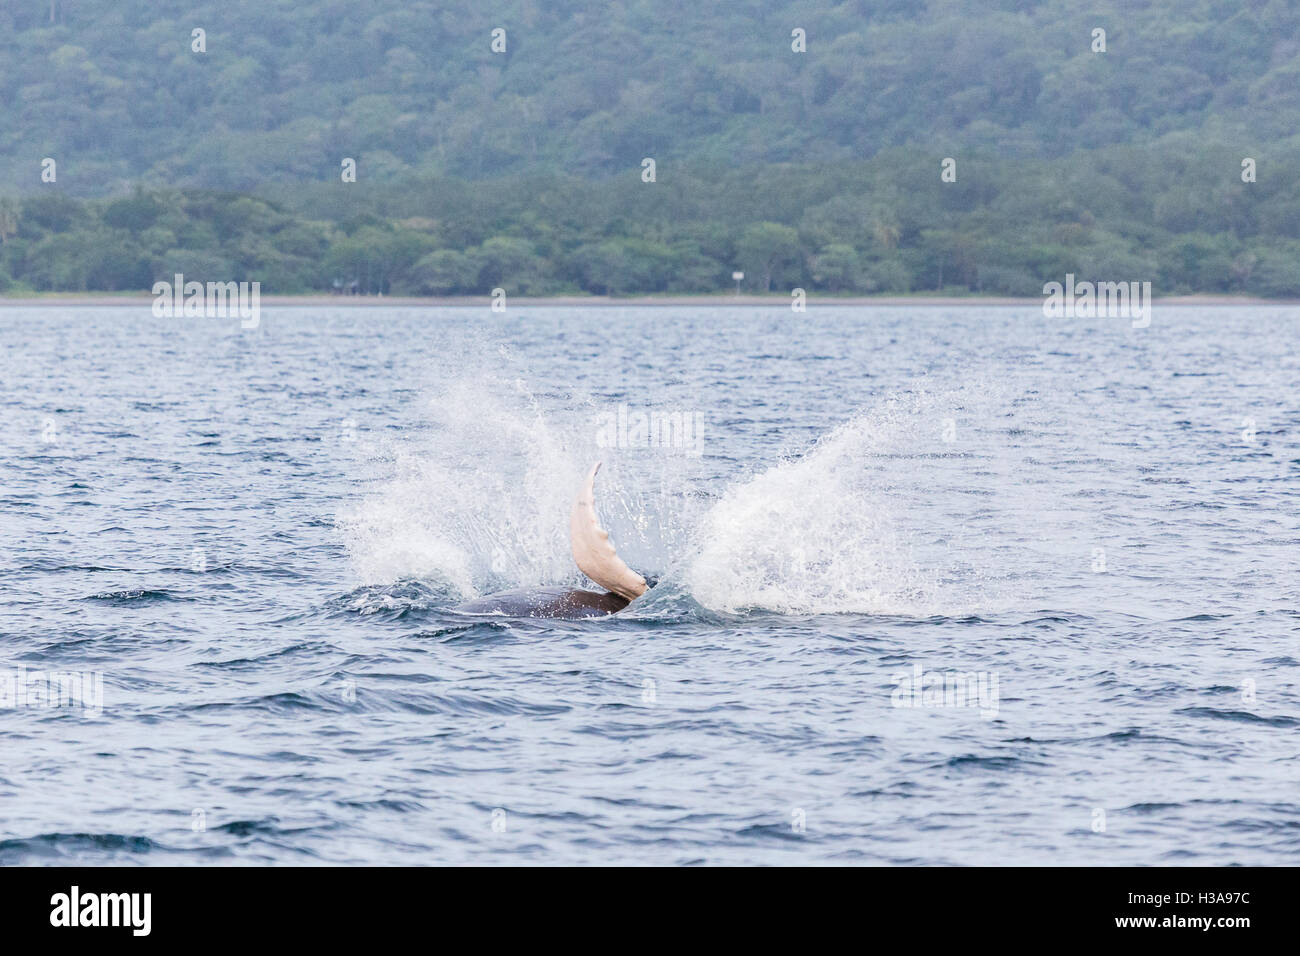 Fin of a humpback whale slams the oceans surface off the coast of Guanacaste, Costa Rica. Stock Photo